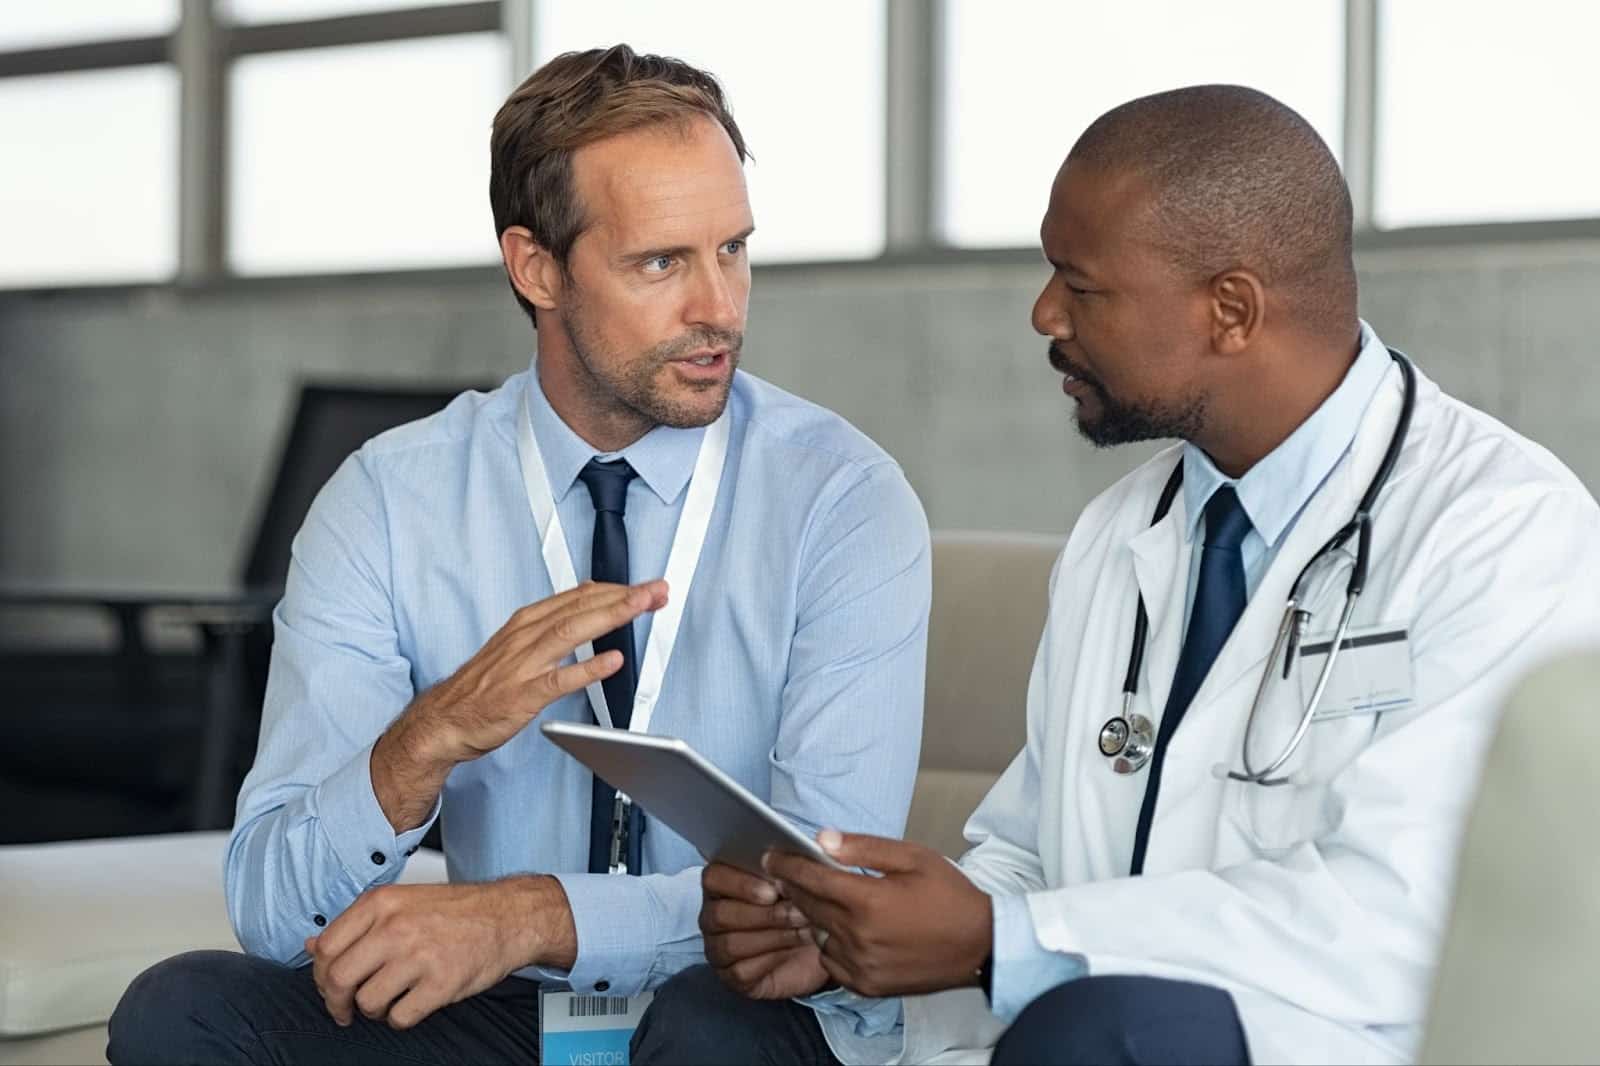 Physician consulting with a client